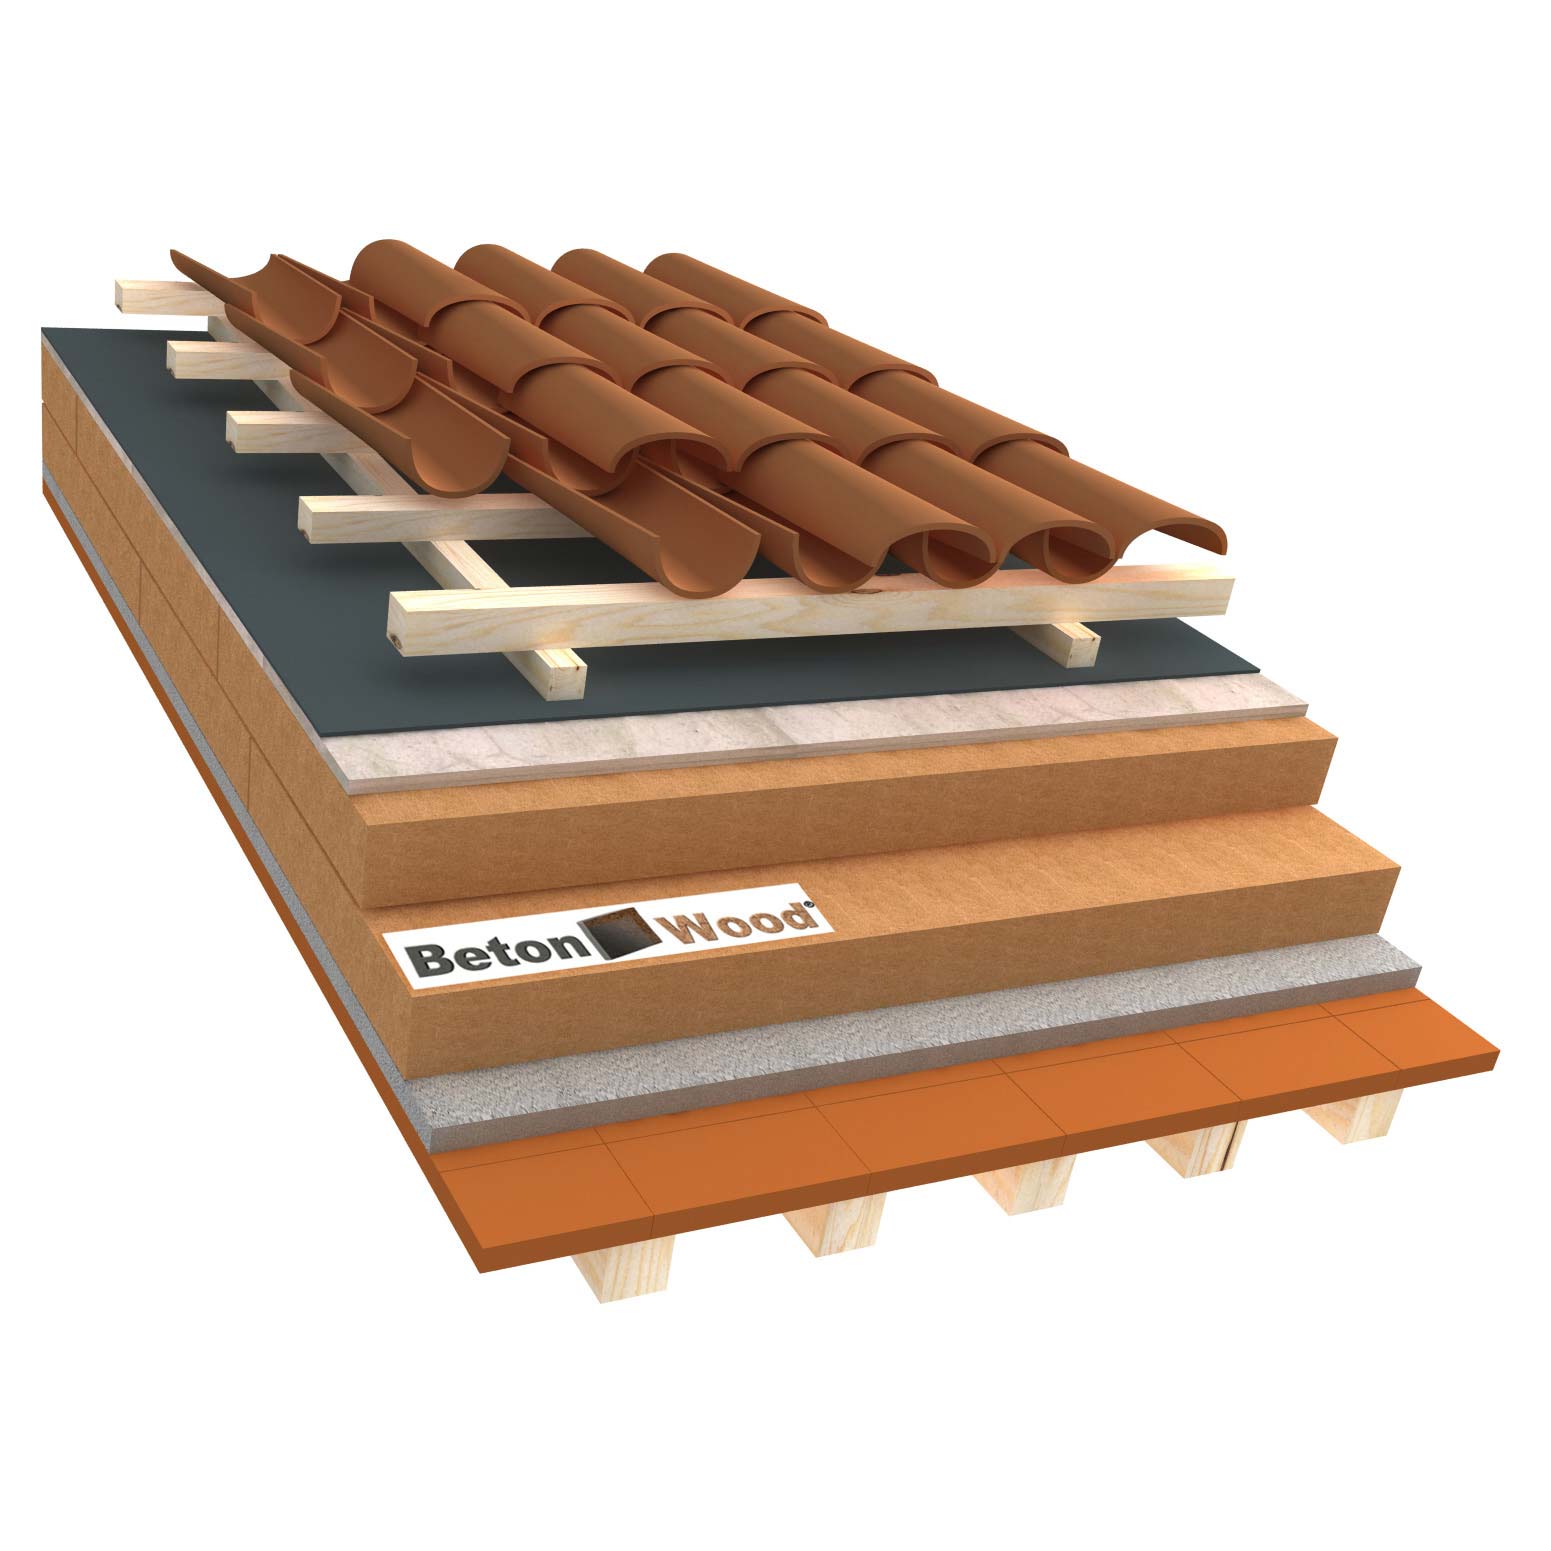 Ventilated roof with wood fiber Therm on terracotta tiles